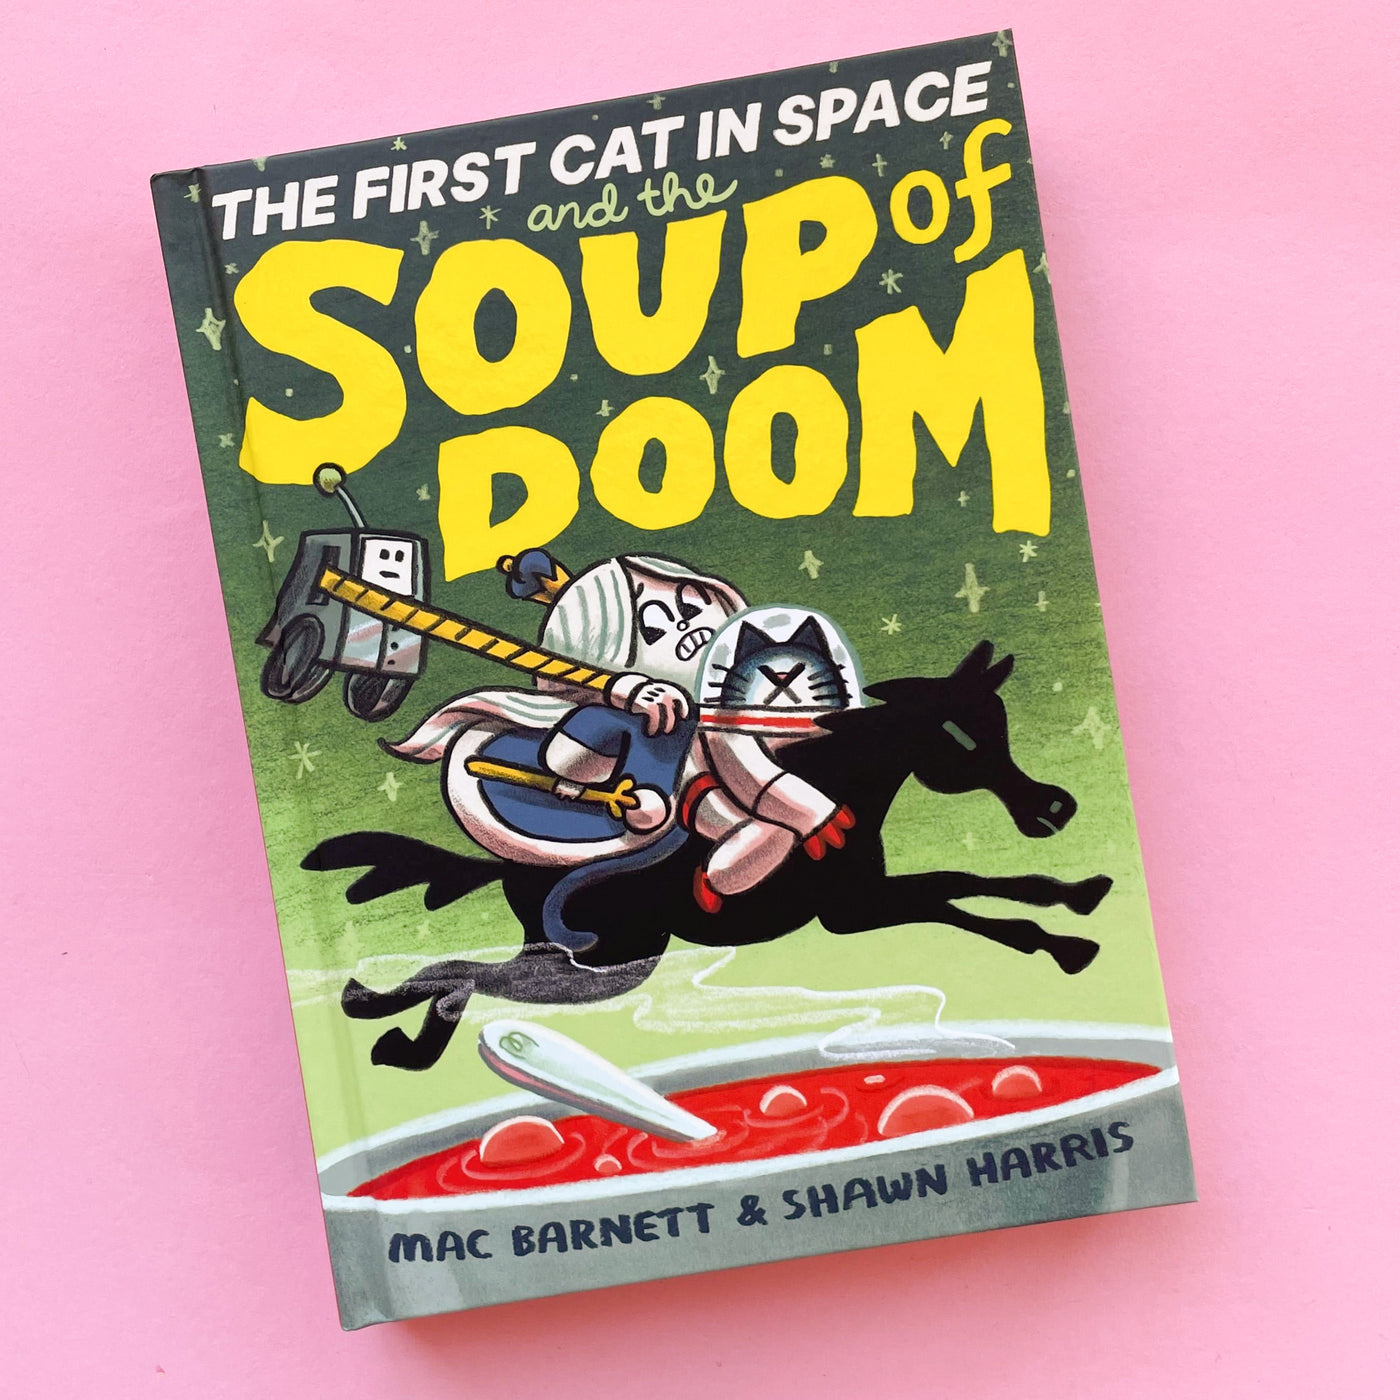 The First Cat in Space and the Soup of Doom by Mac Barnett and Shawn Harris